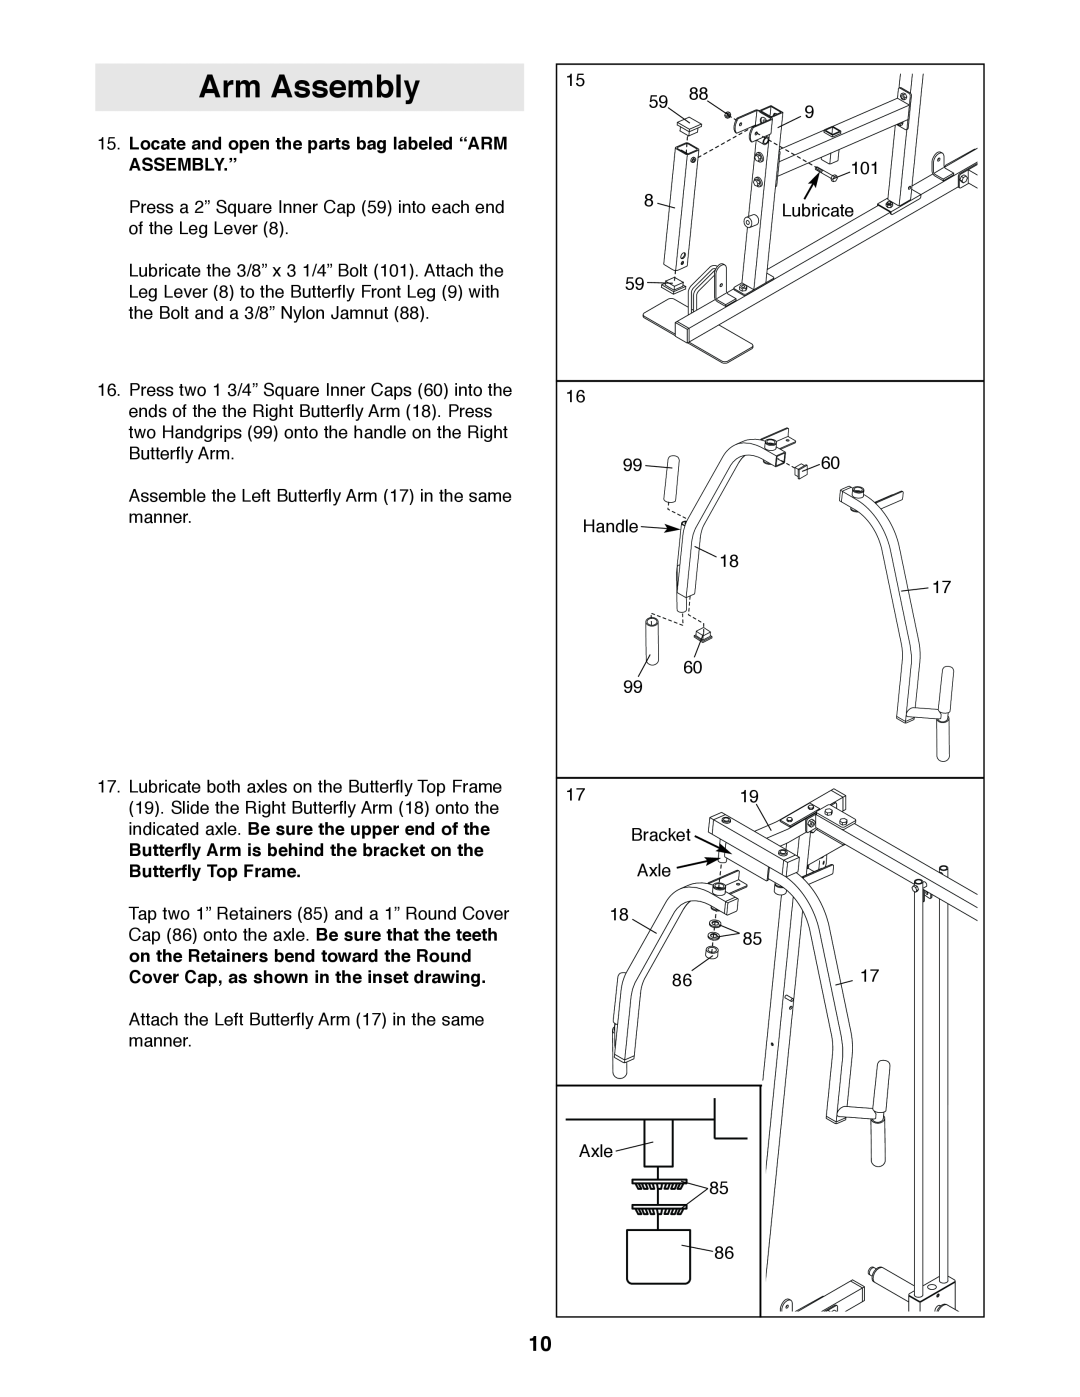 Weider 831.159530 user manual Arm Assembly, Locate and open the parts bag labeled “ARM, Assembly.”, Butterfly Top Frame 